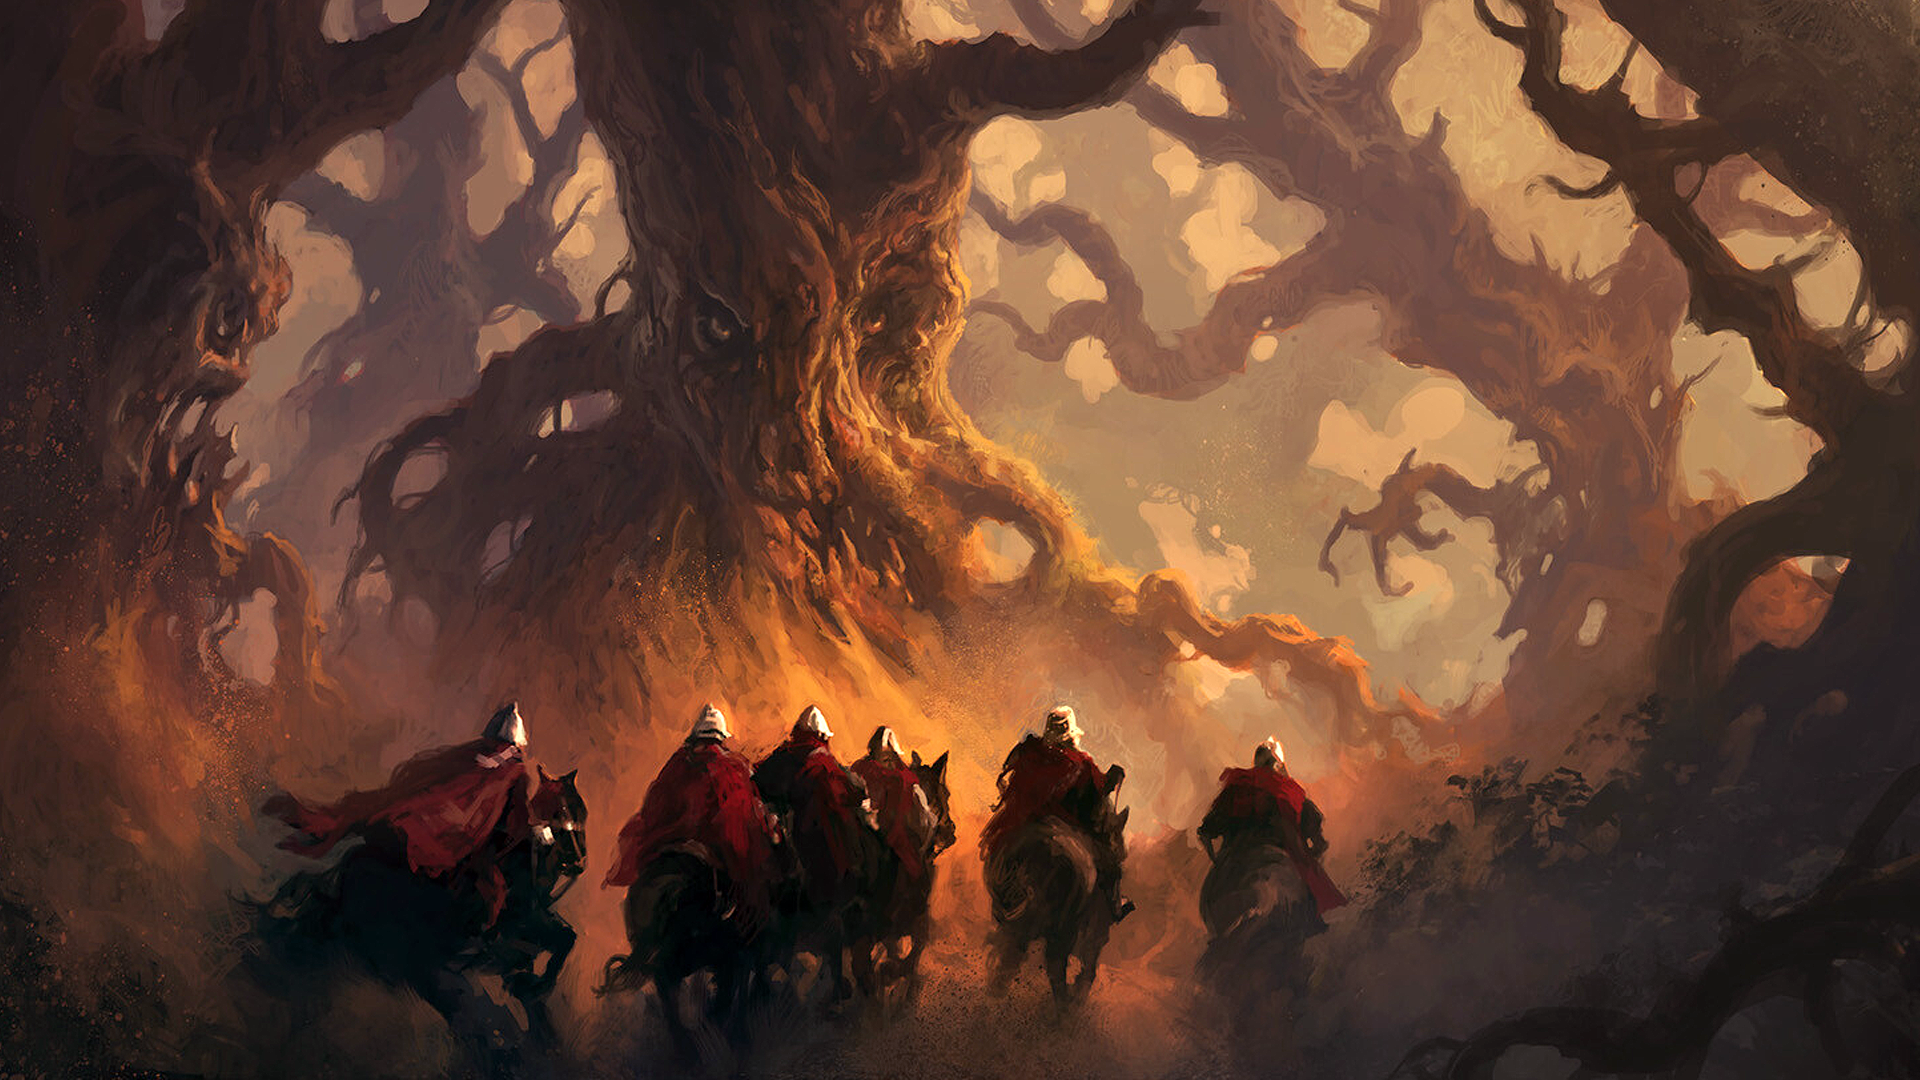 Andreas Rocha Artwork Digital Art Knights Horse Riding Creature Tree Trunk Forest Scary Face Fantasy 1920x1080